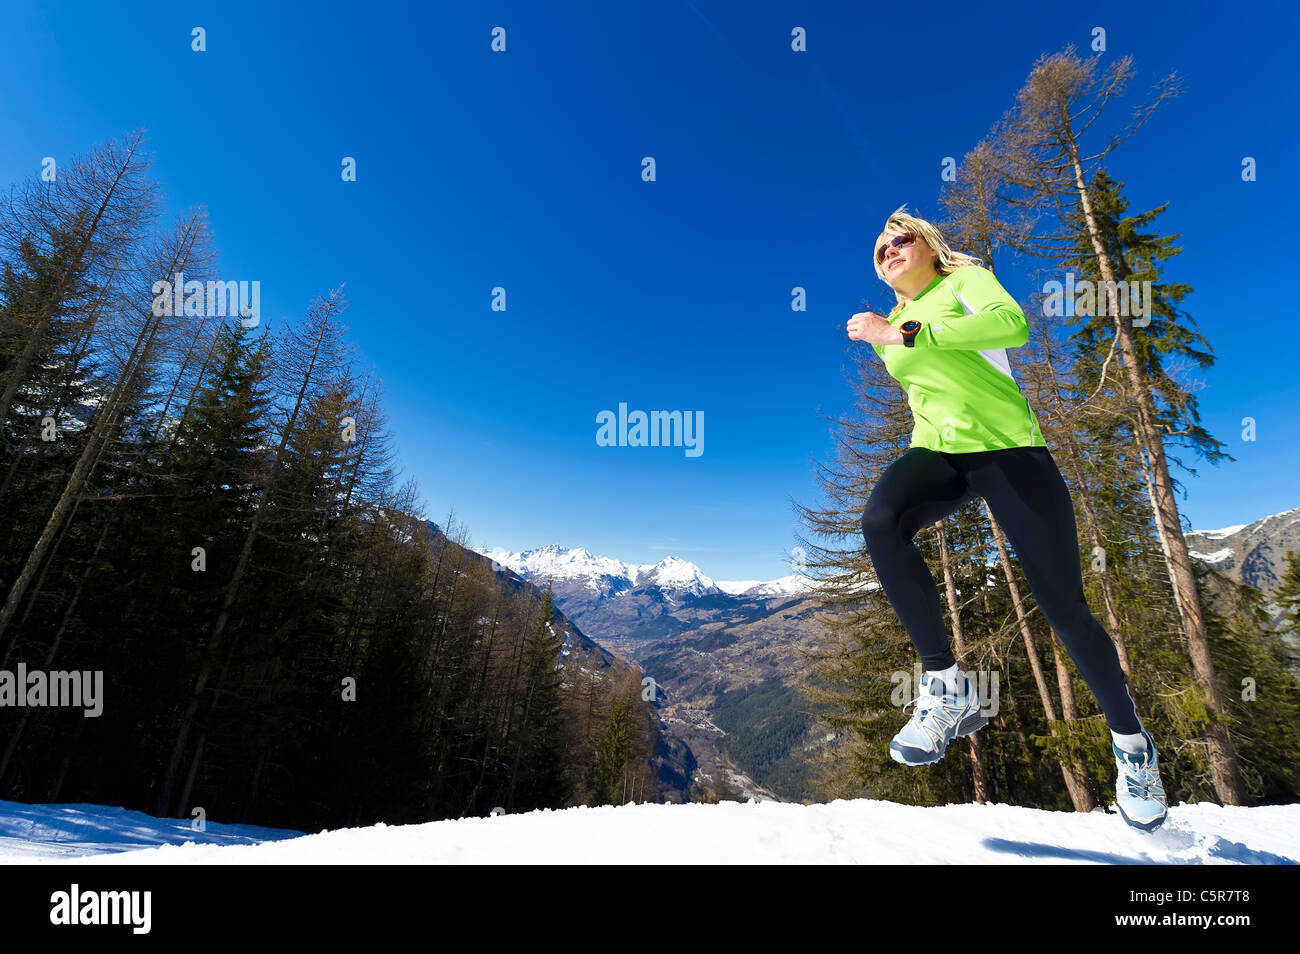 A woman jogging in snowy mountains. Stock Photo